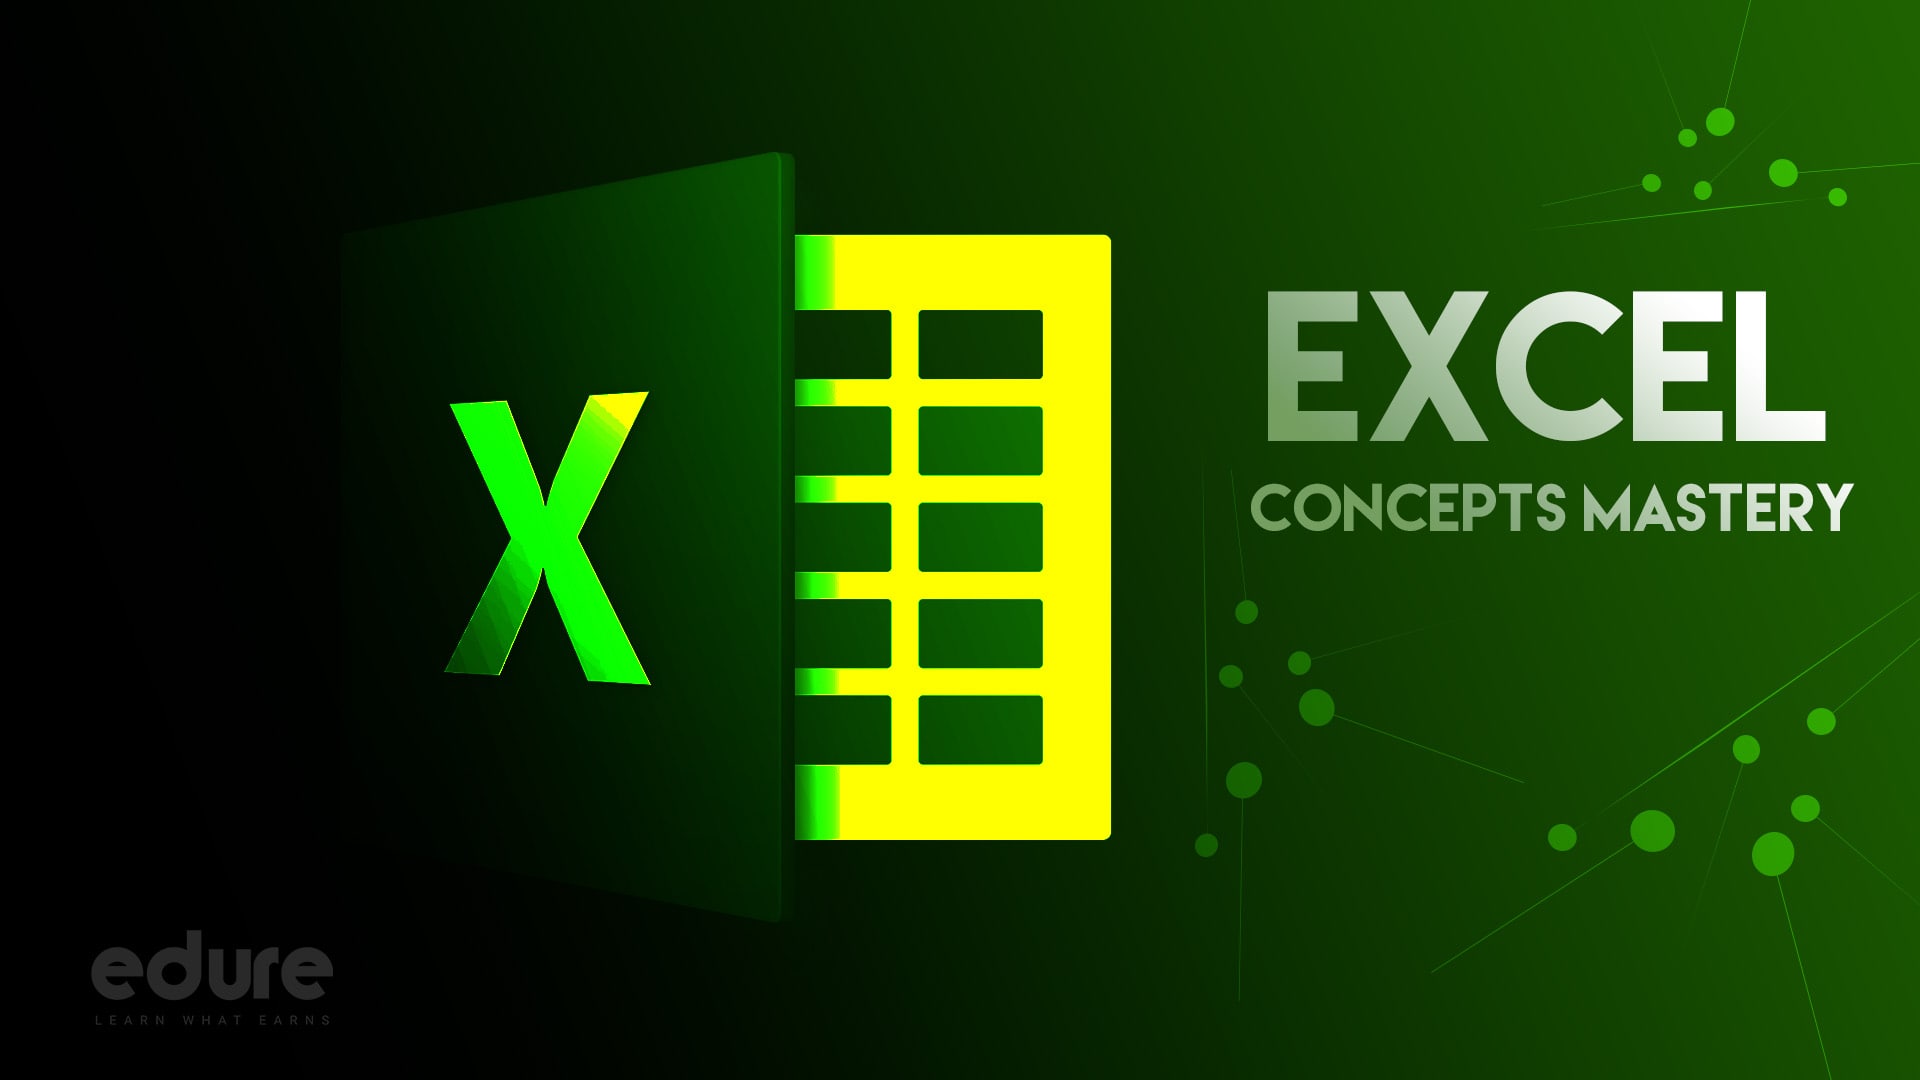 Excel Concepts Mastery